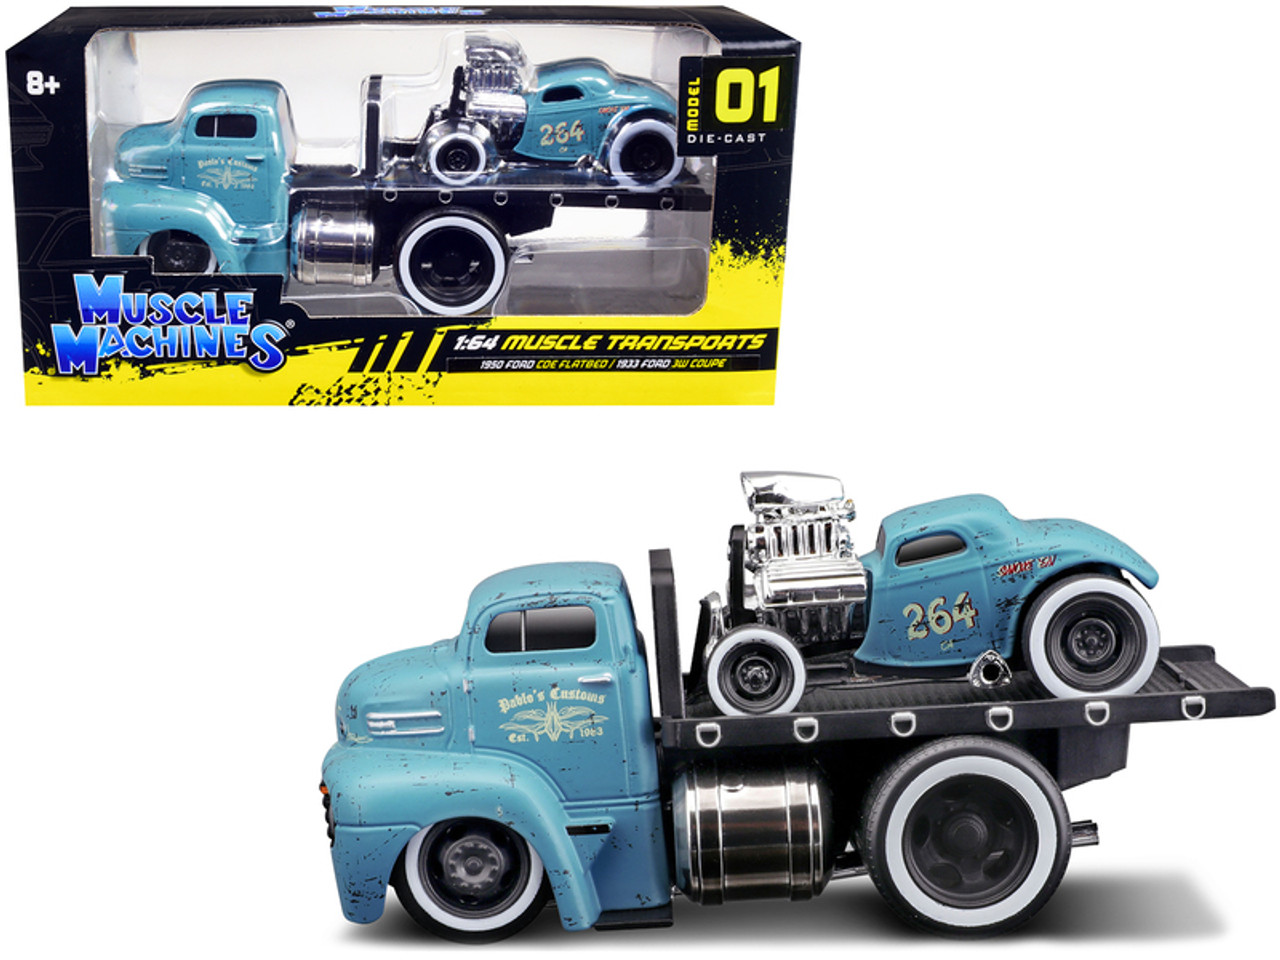 1950 Ford COE Flatbed Truck and 1933 Ford 3W Coupe #264 Matt Light Blue with Graphics (Weathered) "Pablo's Customs" "Muscle Transports" Series 1/64 Diecast Model Cars by Muscle Machines